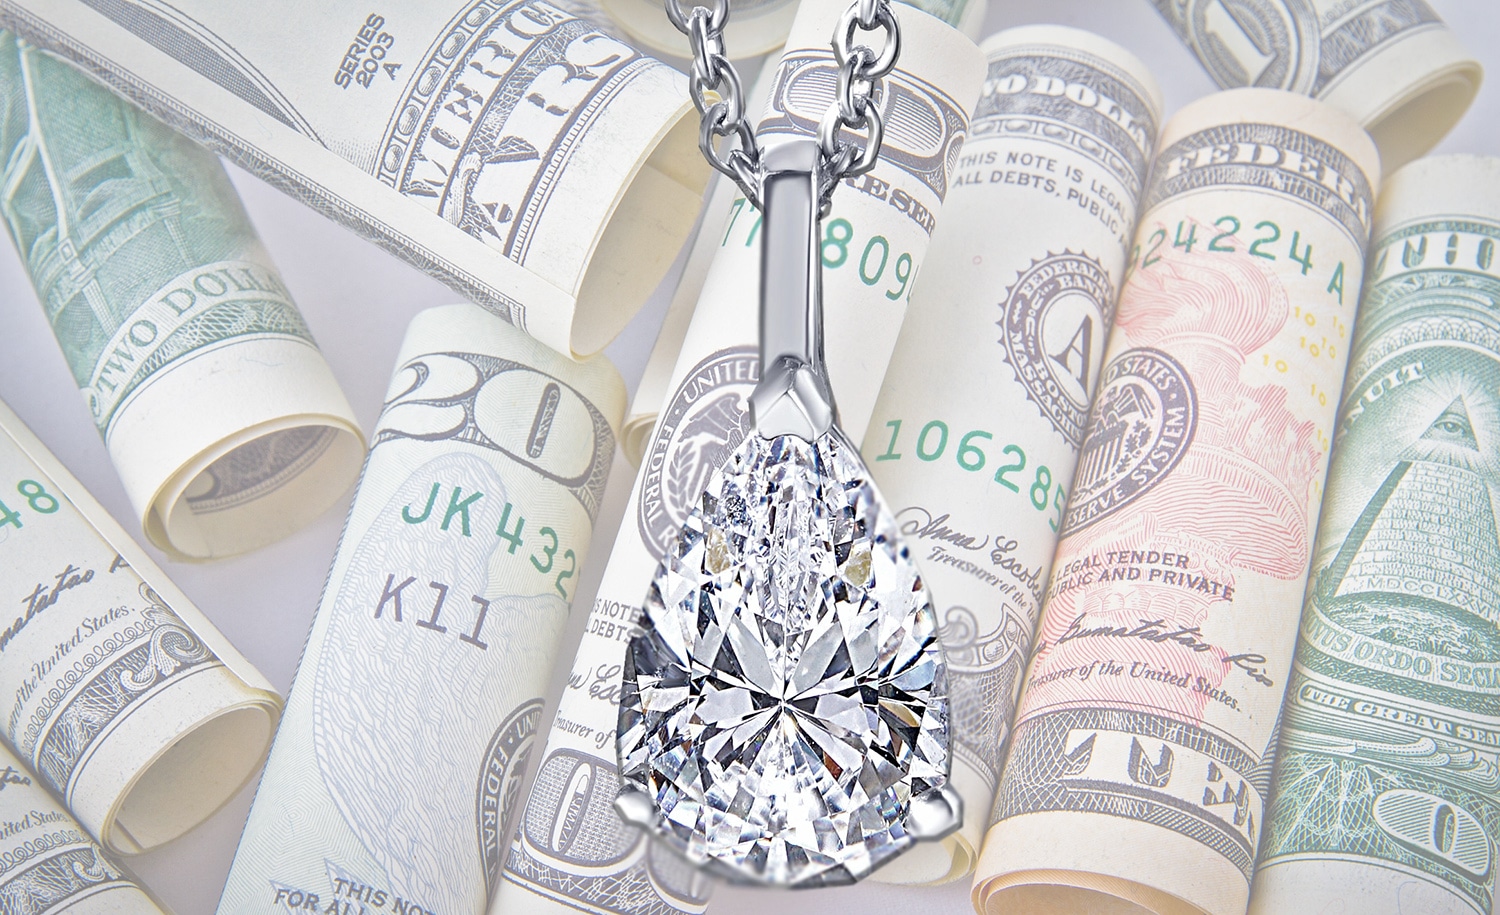 POLISHED DIAMOND PRICES CLOSE OUT 2022